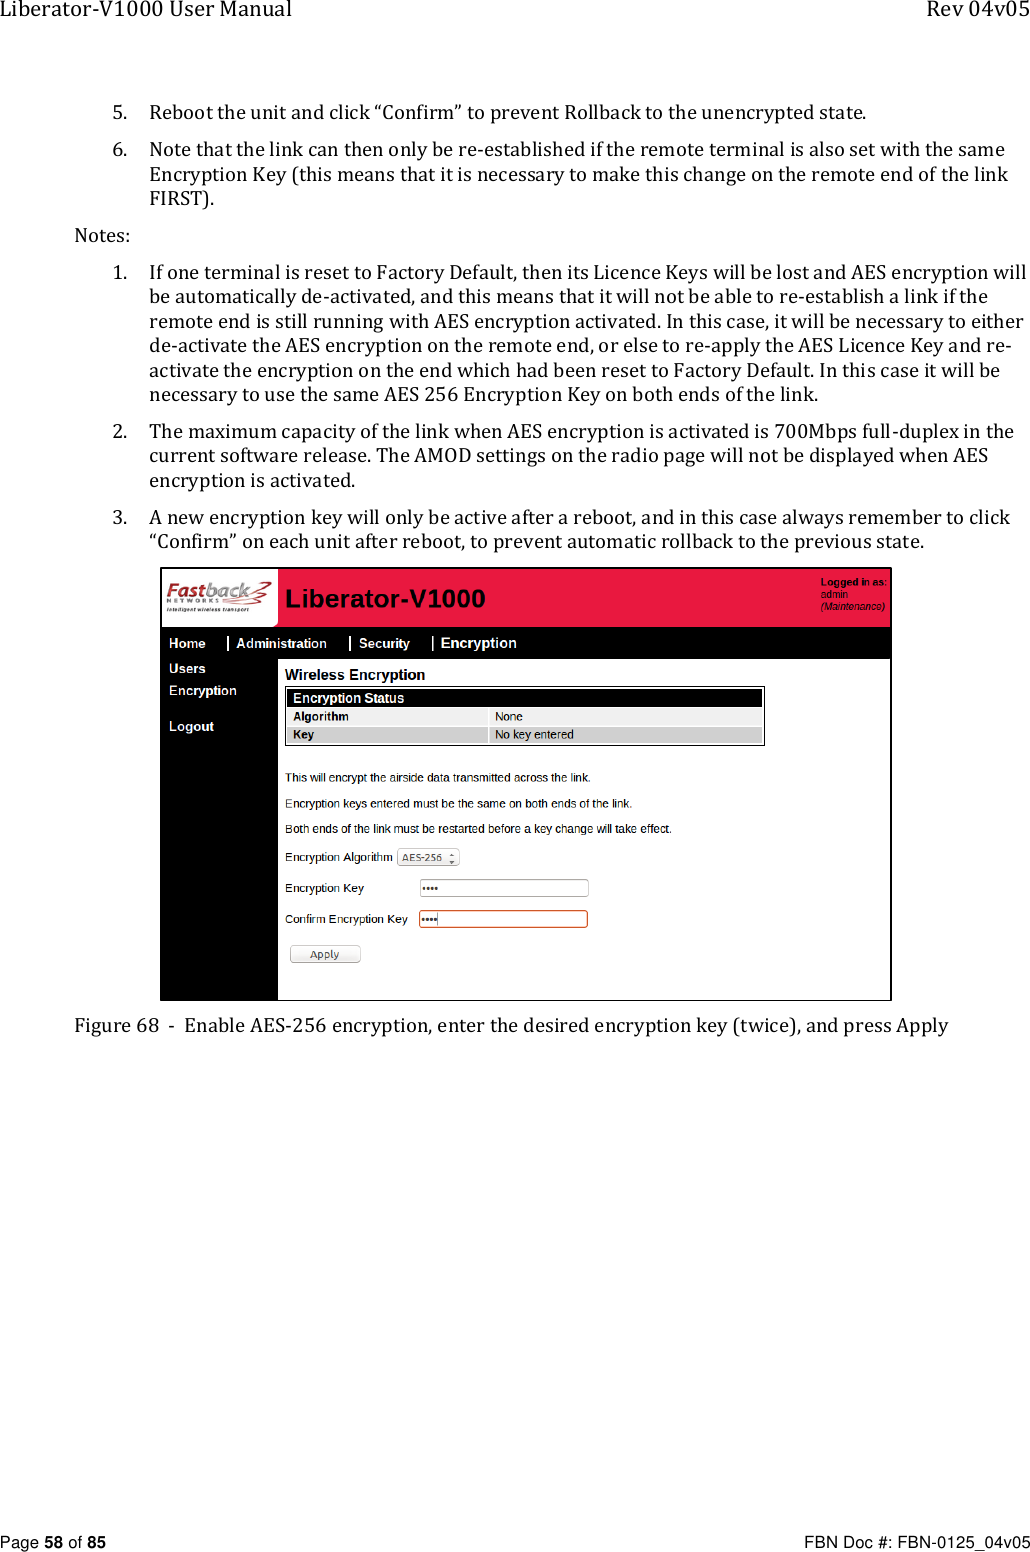 Liberator-V1000 User Manual  Rev 04v05     Page 58 of 85   FBN Doc #: FBN-0125_04v05 5. Reboot the unit and click “Confirm” to prevent Rollback to the unencrypted state. 6. Note that the link can then only be re-established if the remote terminal is also set with the same Encryption Key (this means that it is necessary to make this change on the remote end of the link FIRST). Notes: 1. If one terminal is reset to Factory Default, then its Licence Keys will be lost and AES encryption will be automatically de-activated, and this means that it will not be able to re-establish a link if the remote end is still running with AES encryption activated. In this case, it will be necessary to either de-activate the AES encryption on the remote end, or else to re-apply the AES Licence Key and re-activate the encryption on the end which had been reset to Factory Default. In this case it will be necessary to use the same AES 256 Encryption Key on both ends of the link. 2. The maximum capacity of the link when AES encryption is activated is 700Mbps full-duplex in the current software release. The AMOD settings on the radio page will not be displayed when AES encryption is activated. 3. A new encryption key will only be active after a reboot, and in this case always remember to click “Confirm” on each unit after reboot, to prevent automatic rollback to the previous state.  Figure 68  -  Enable AES-256 encryption, enter the desired encryption key (twice), and press Apply  